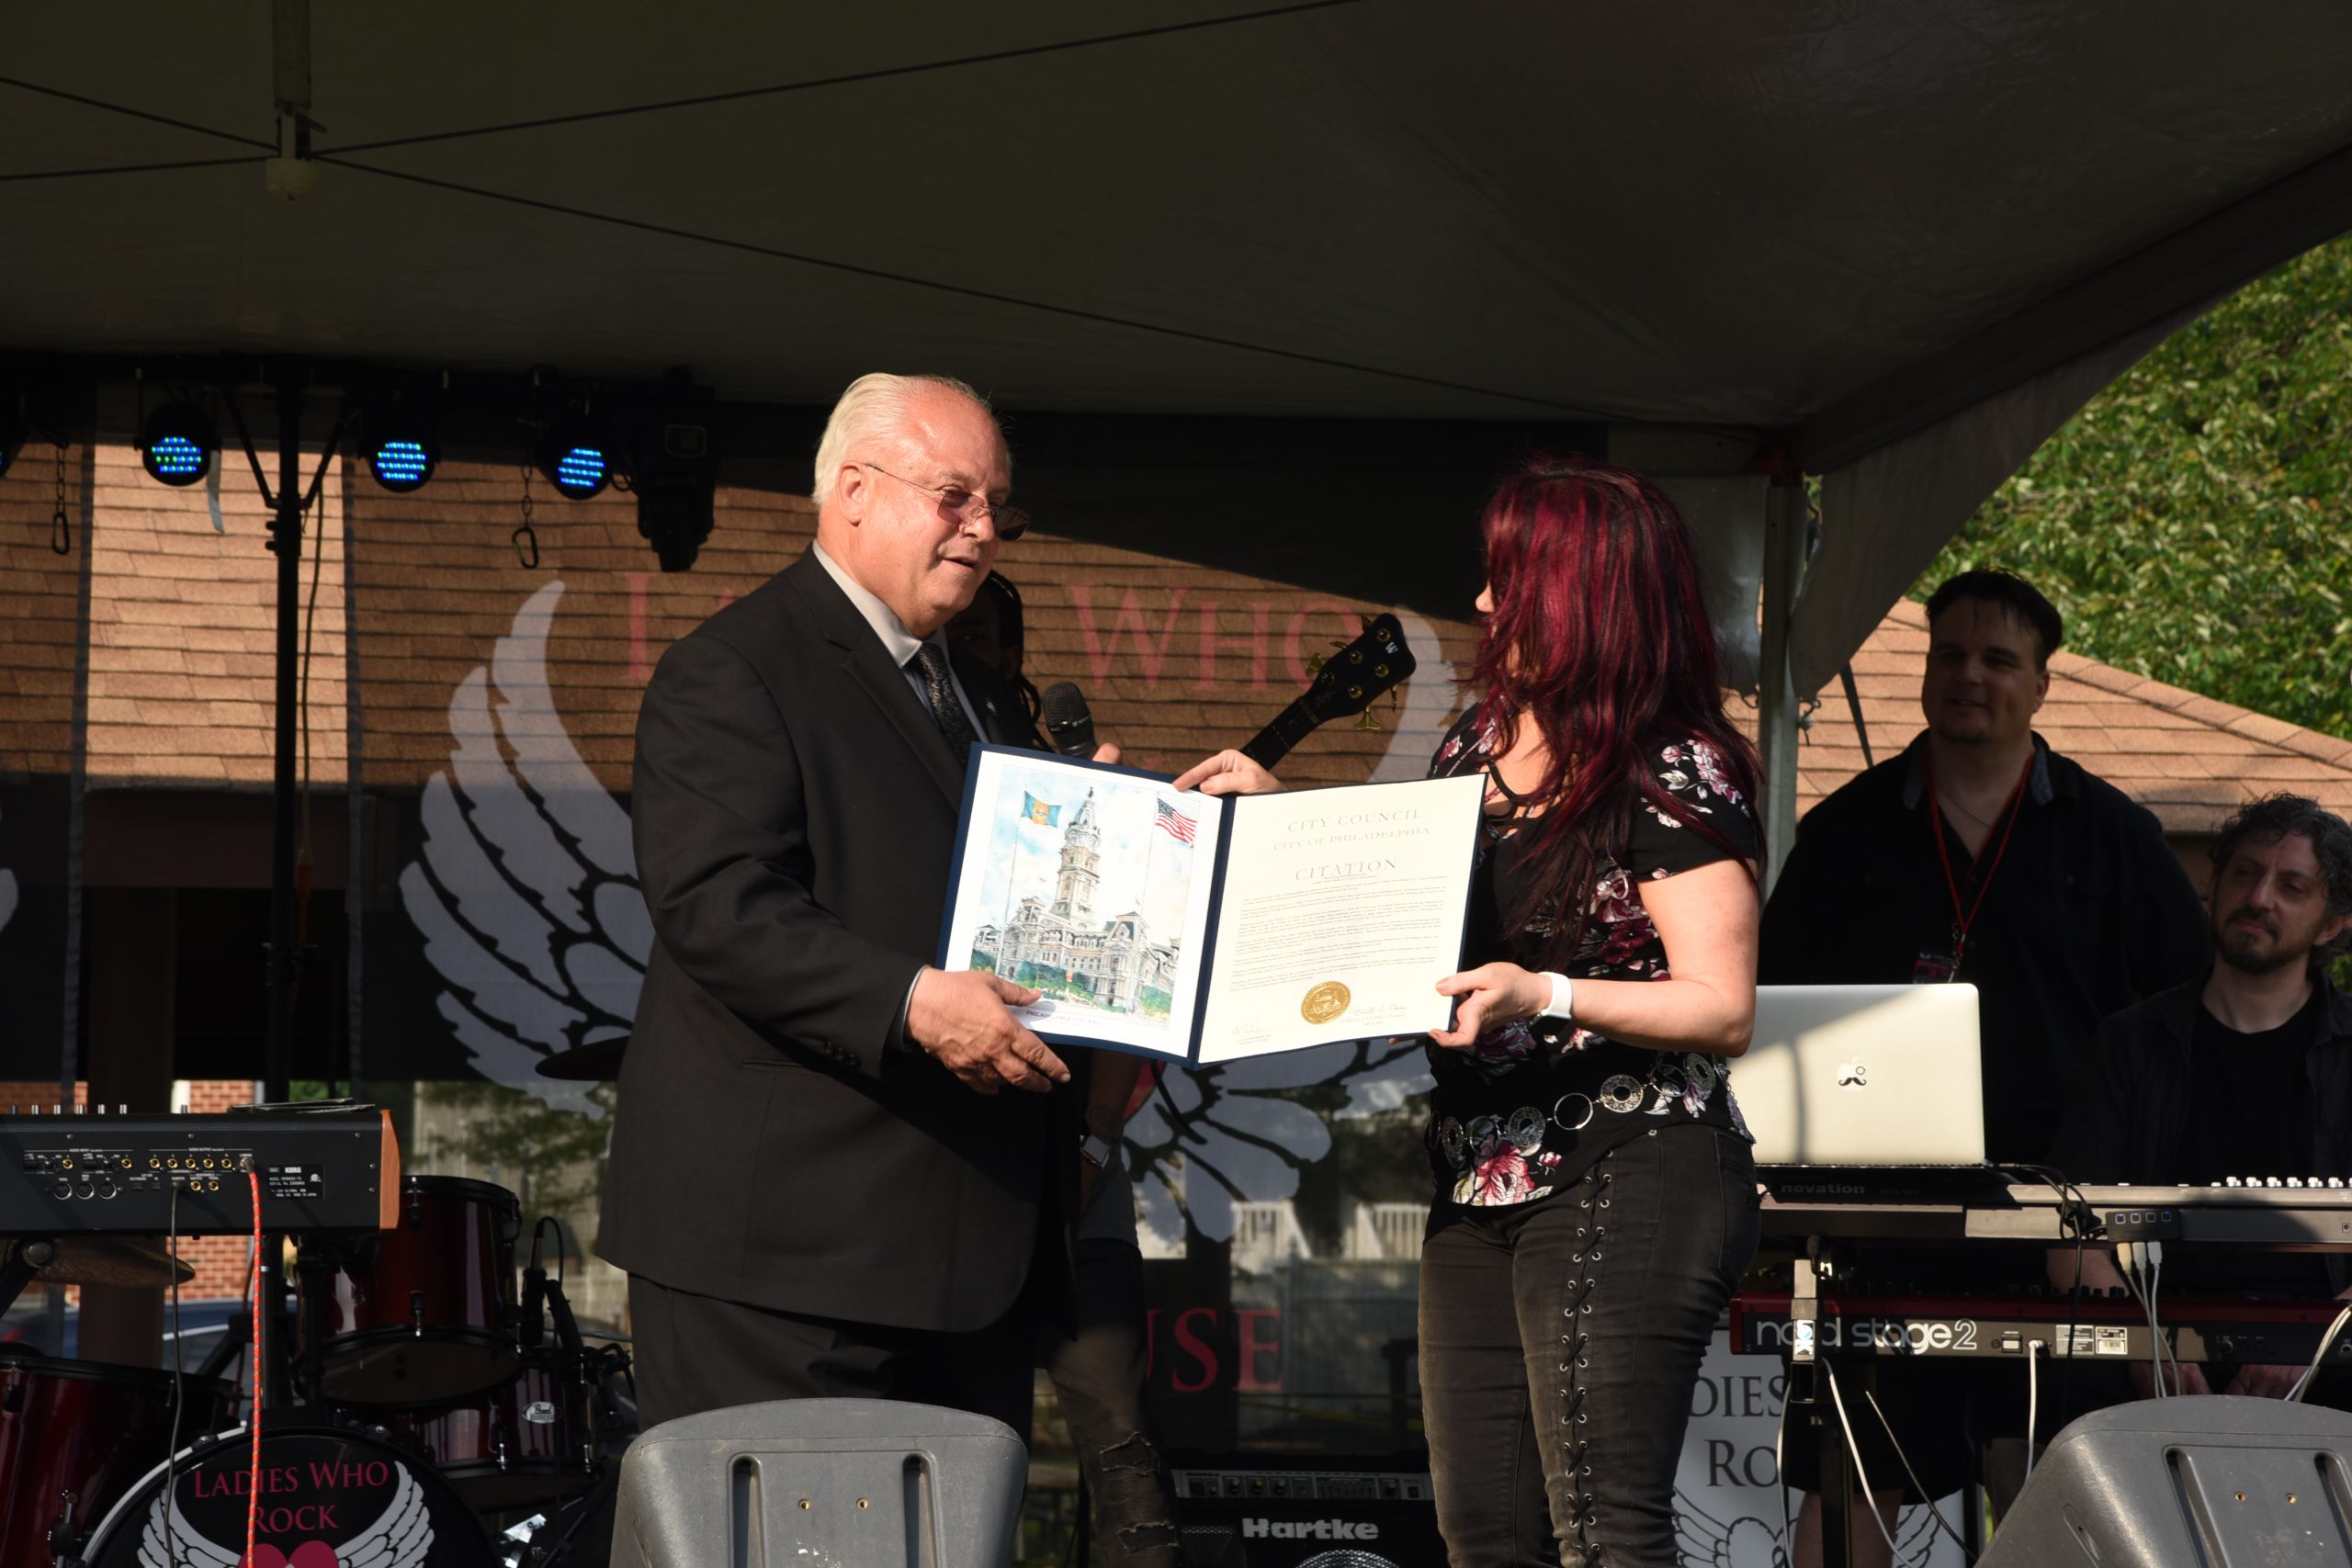 Sharon Lia Pres & CEO being presented with a commendation for the work of LWRFAC, from Philadelphia city councilman-at-large Al Taubenberger at 2018 Festival.